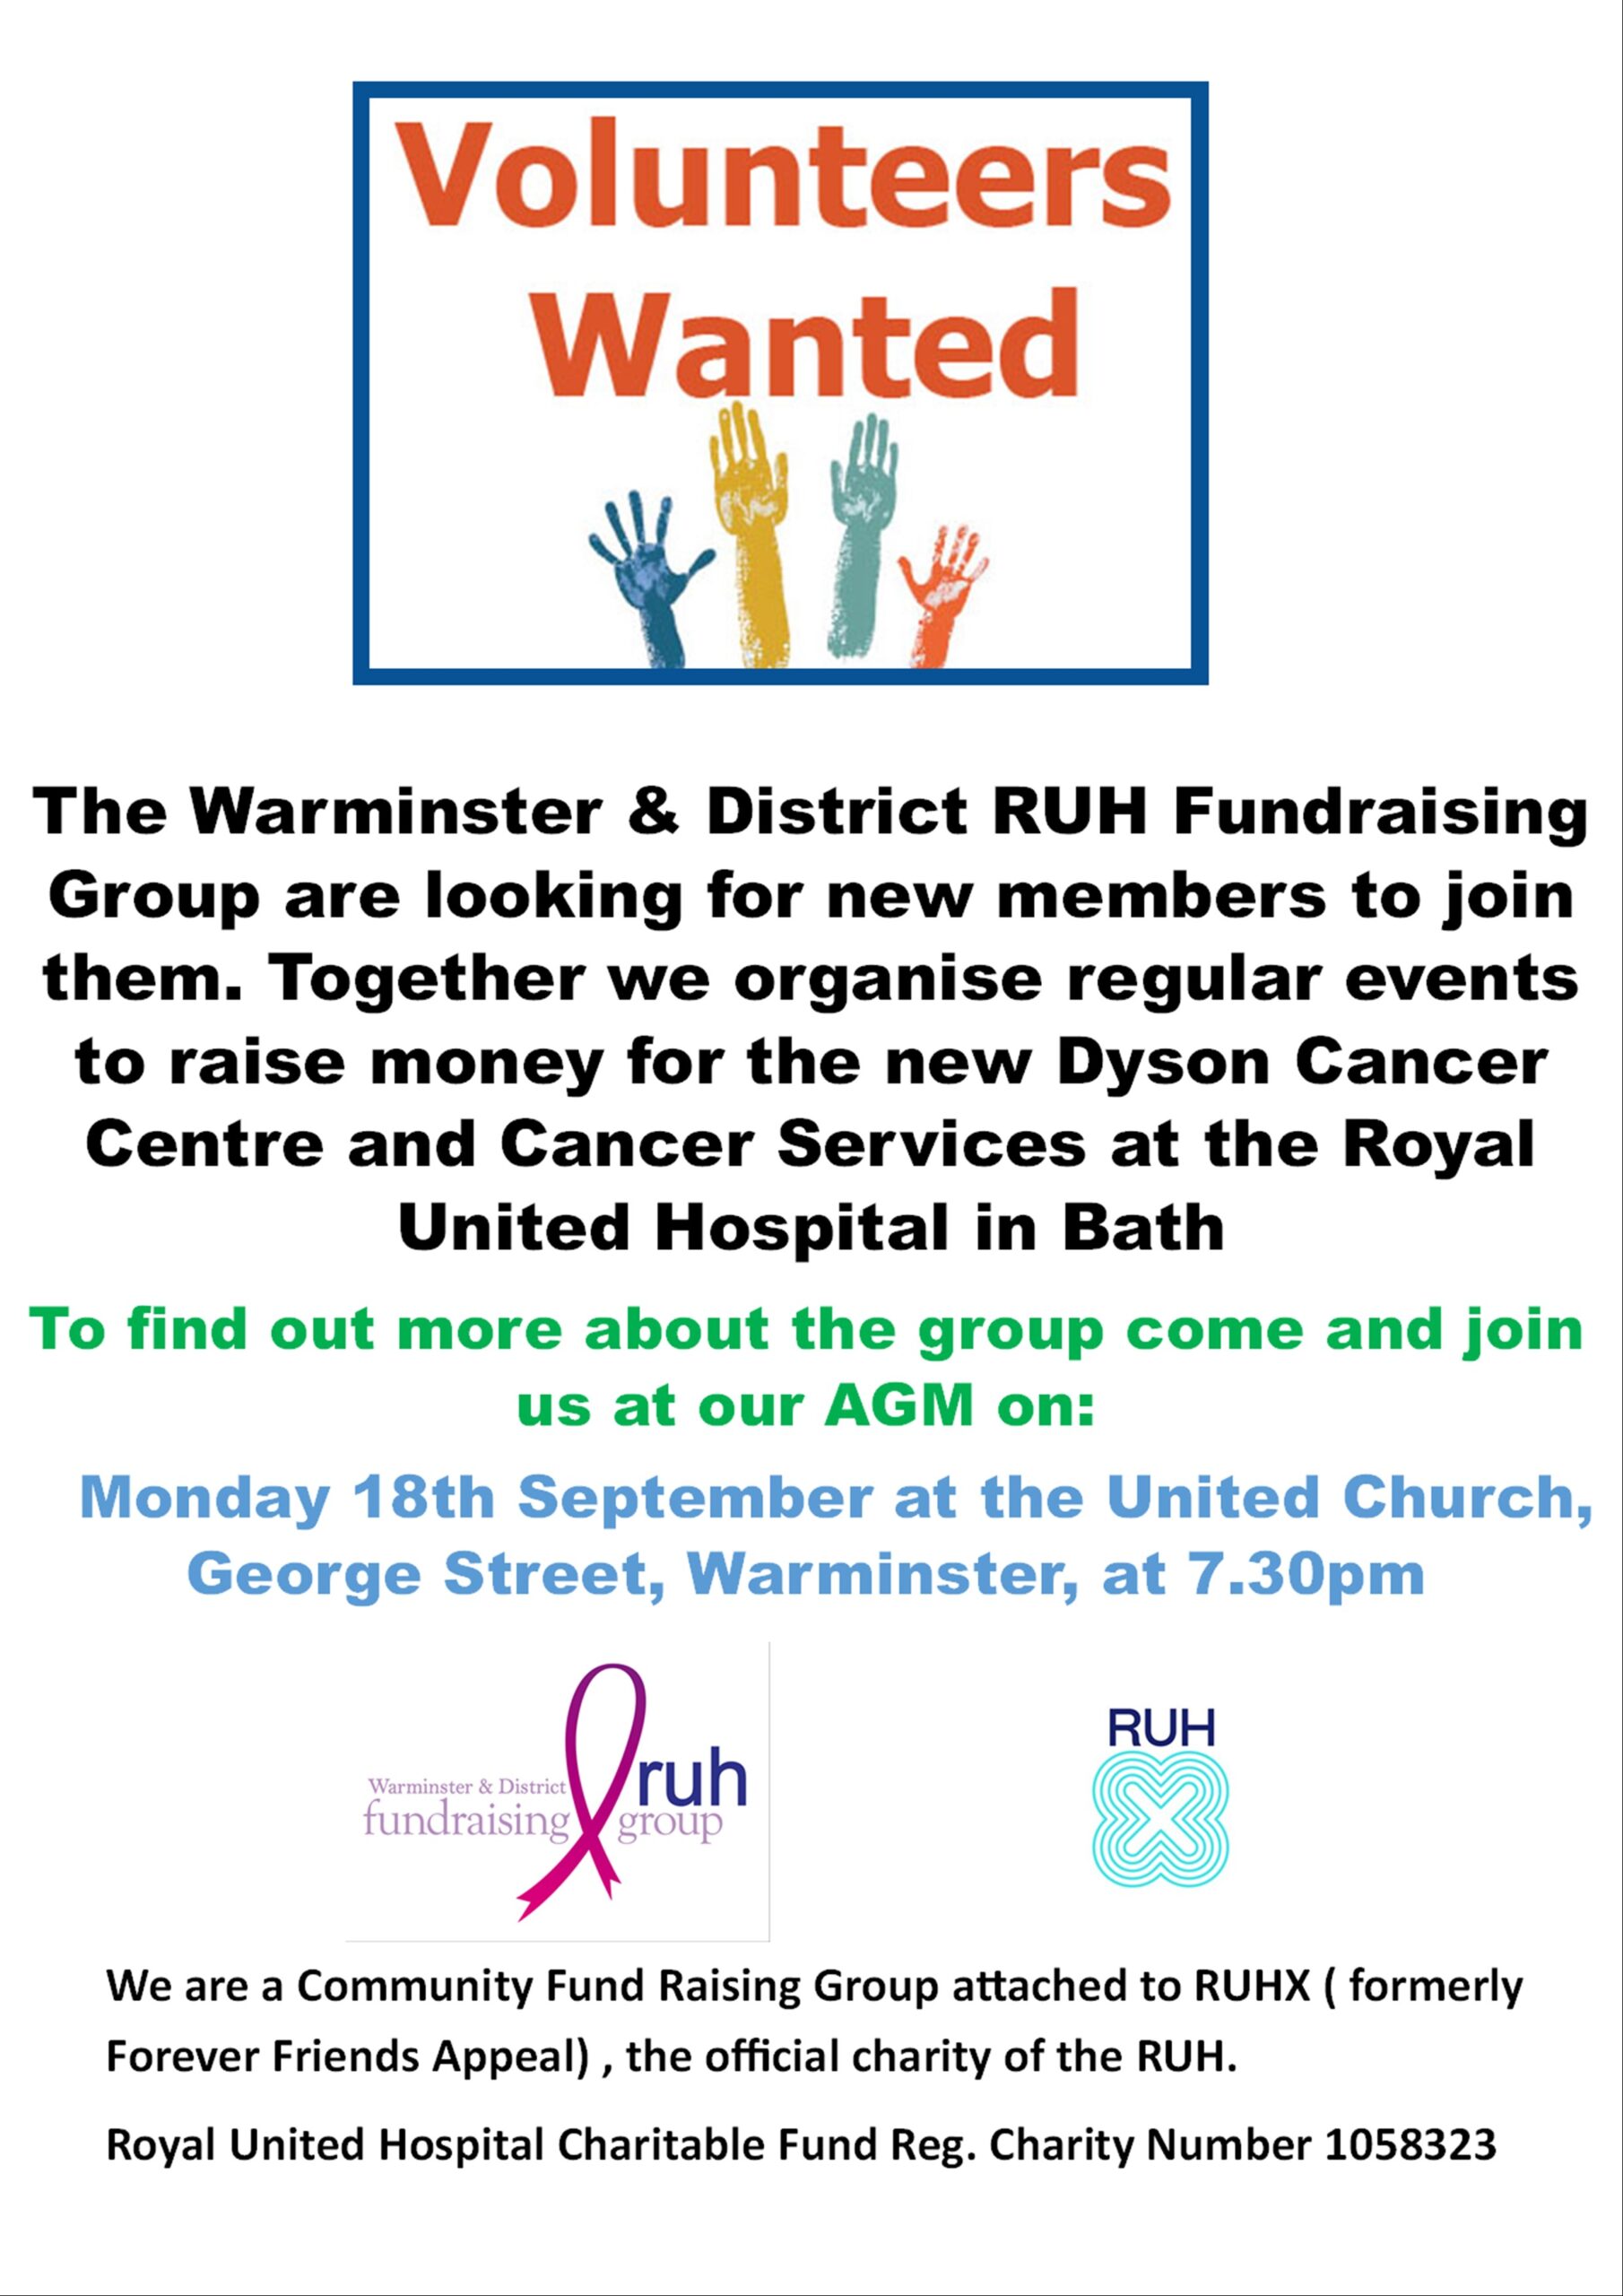 Warminster & District RUH Fundraising Group - AGM